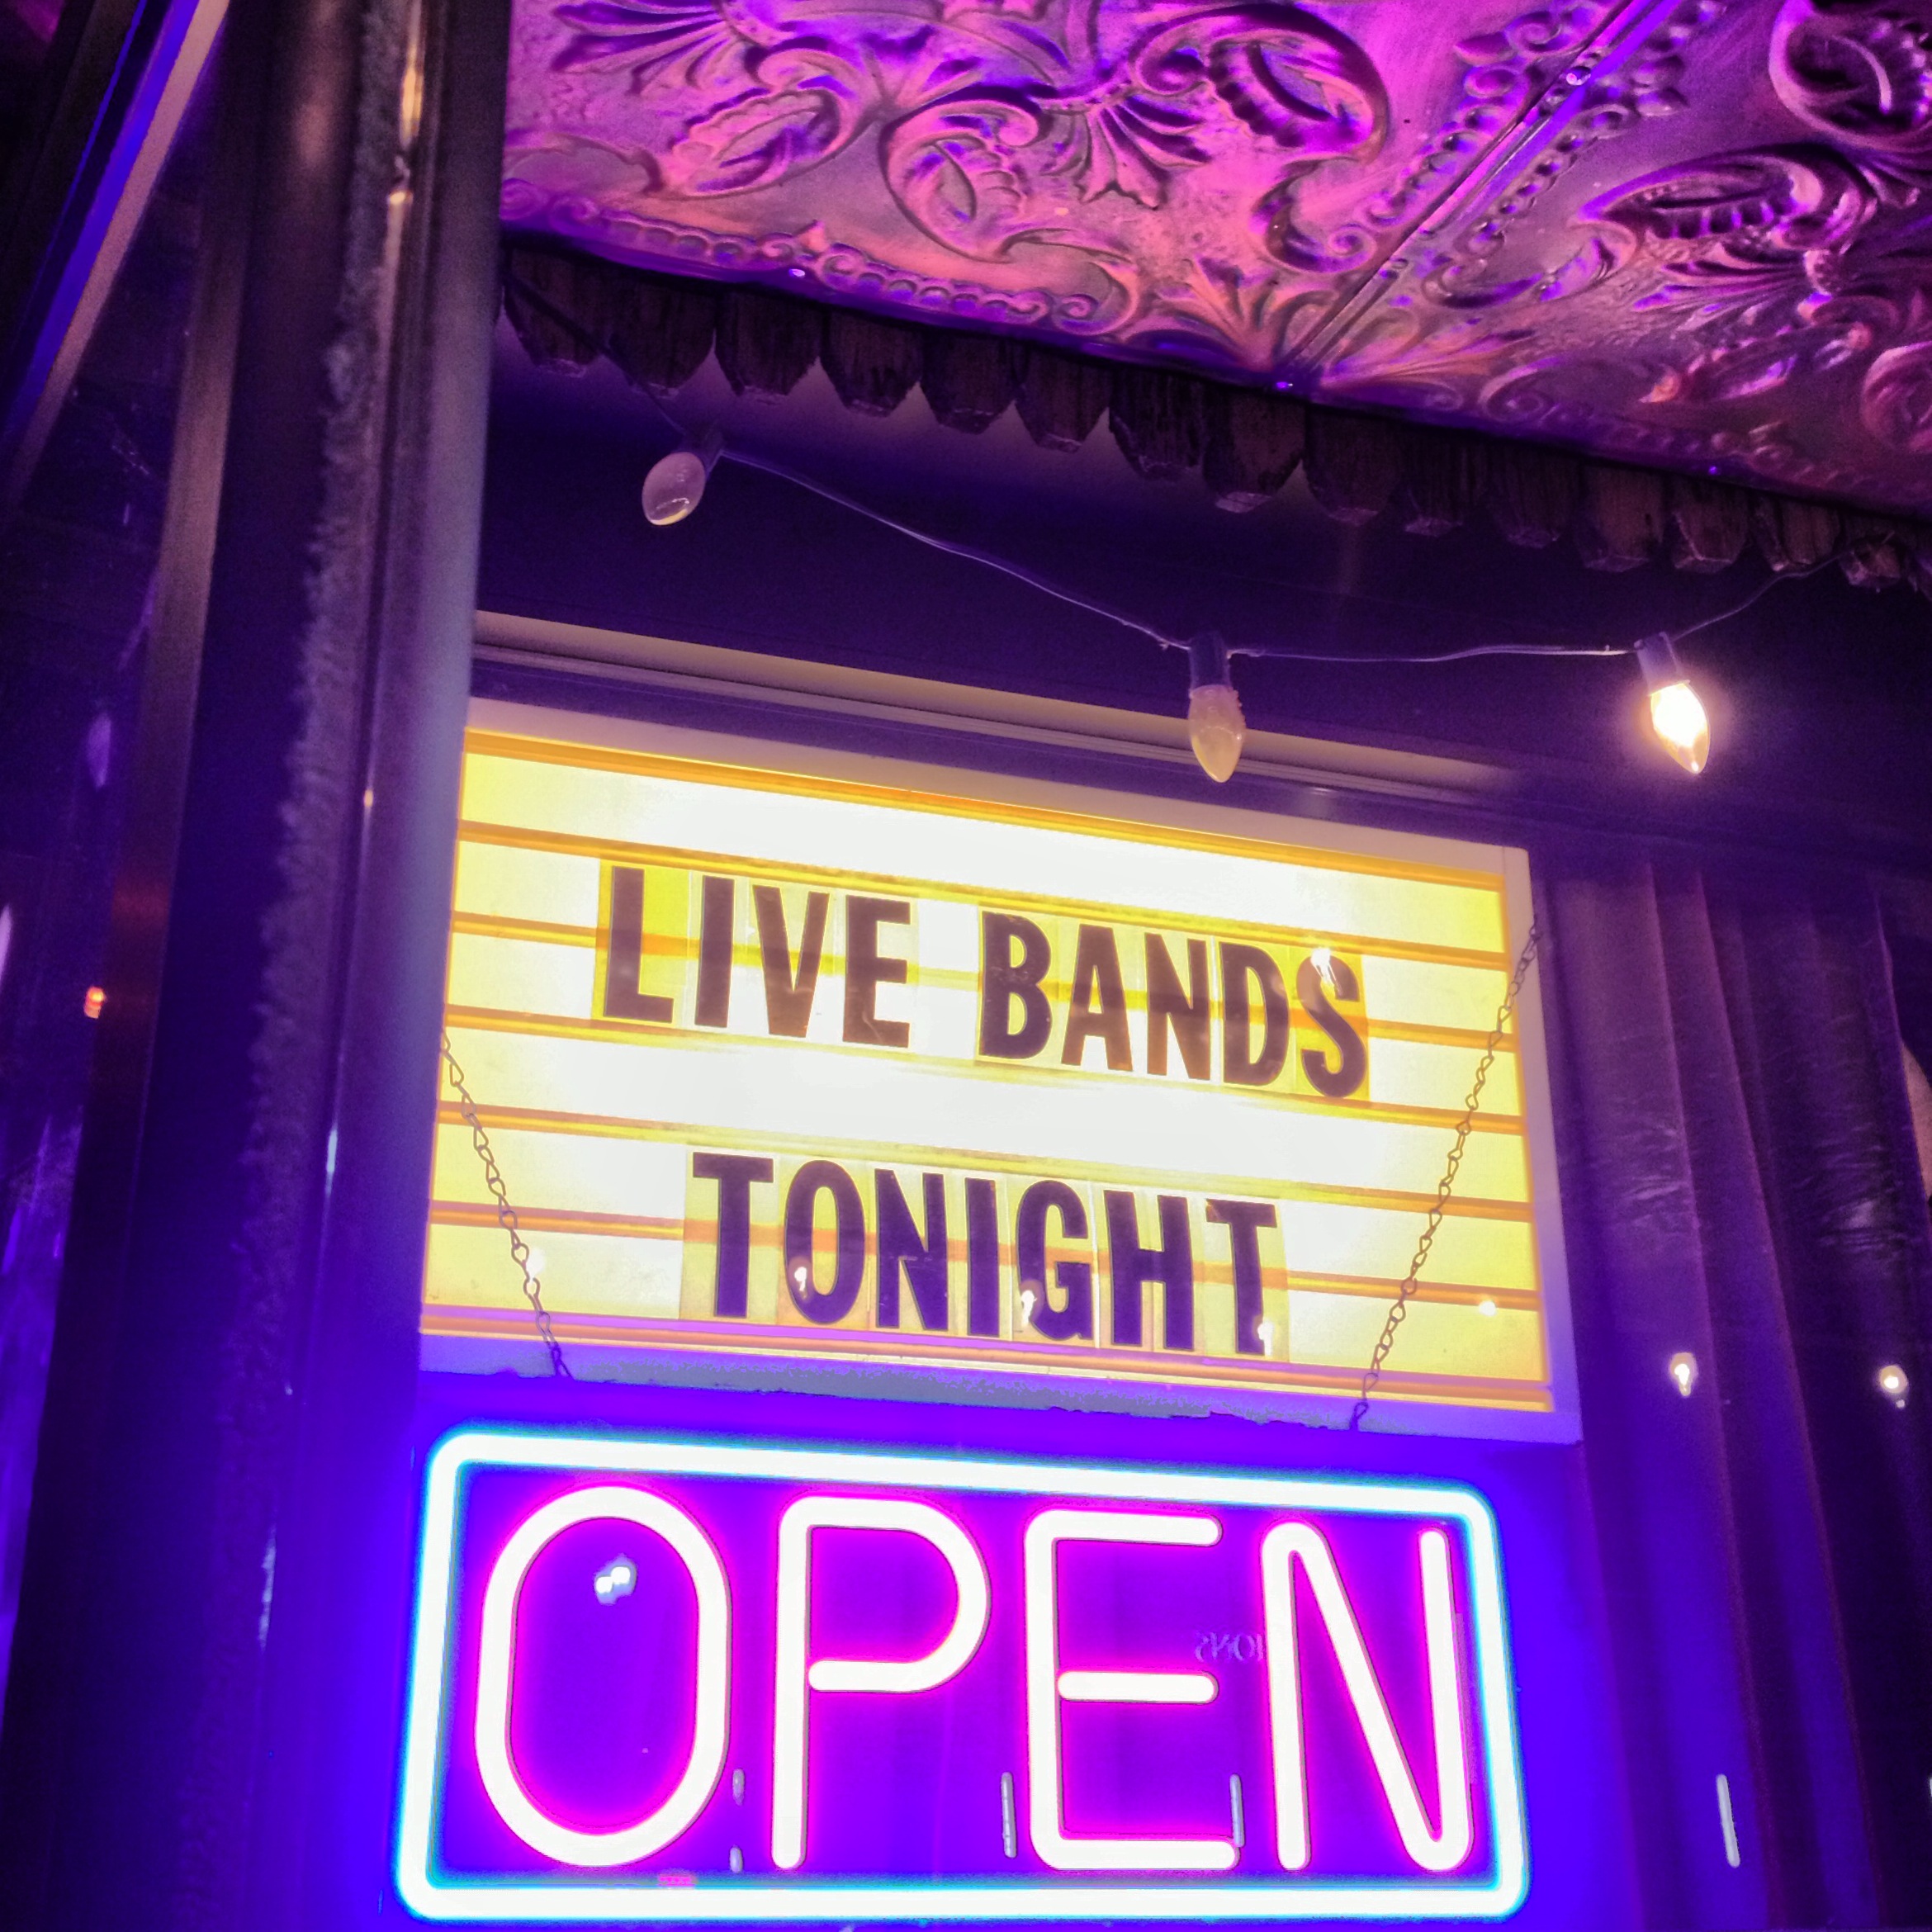 Wordless Wednesday: Live Bands Tonight